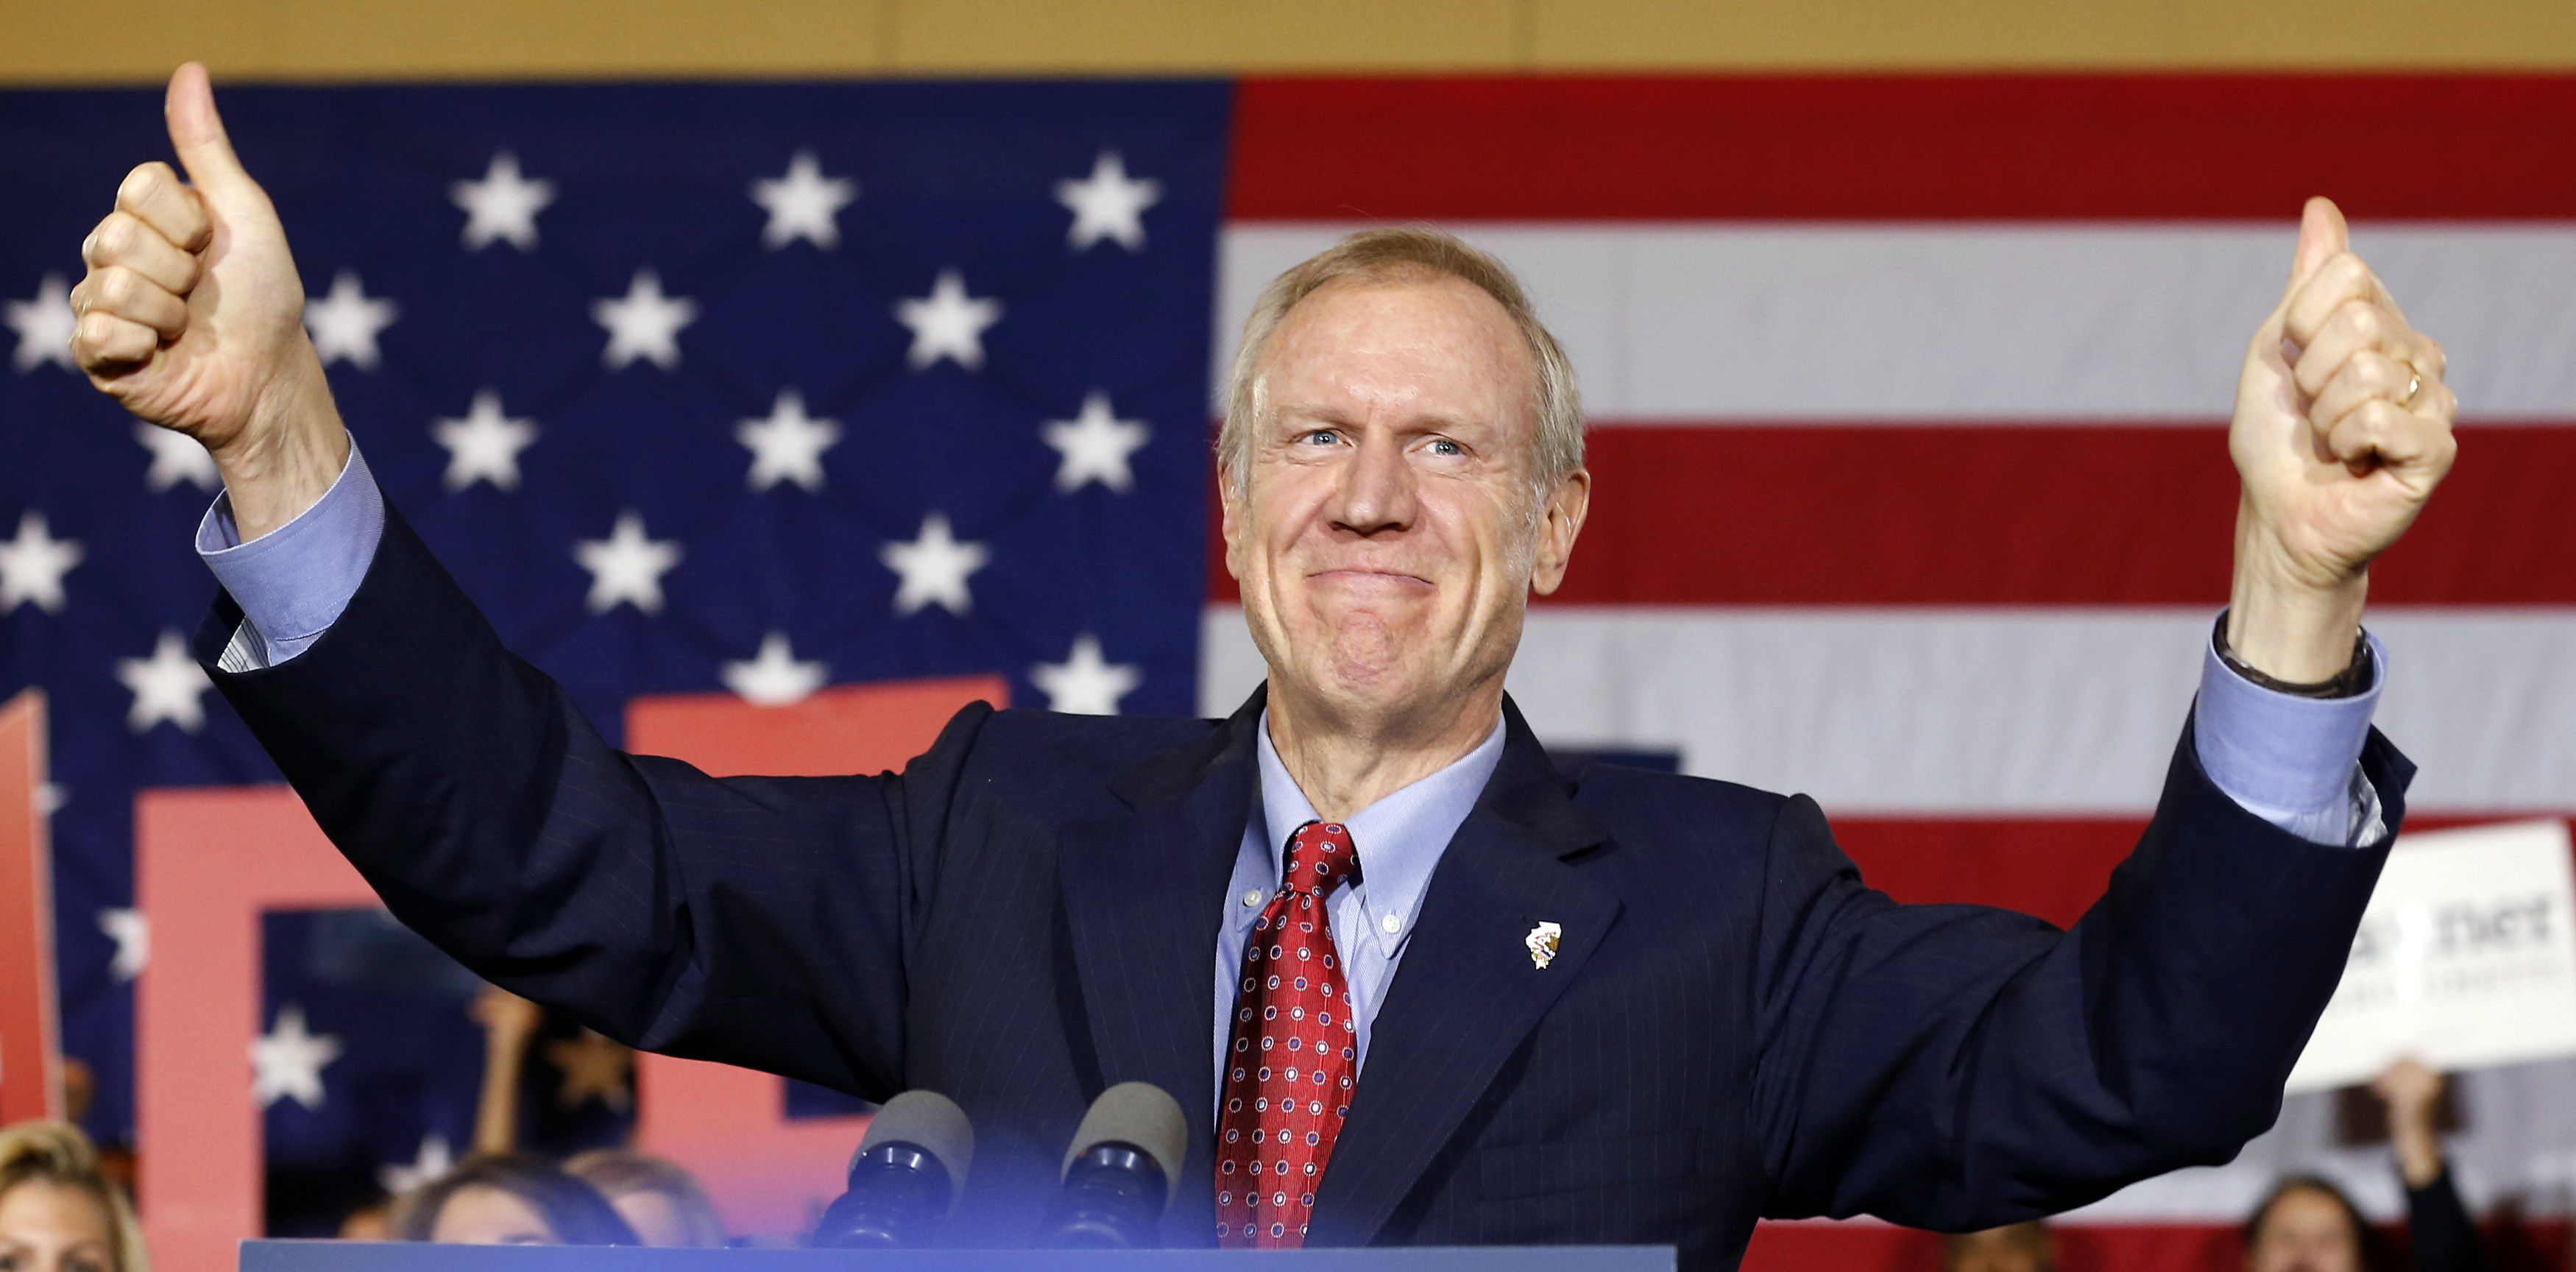 Republican Bruce Rauner gives a thumbs-up after winning the midterm elections in Chicago, Illinois, November 4, 2014. REUTERS/Jim Young (UNITED STATES - Tags: POLITICS ELECTIONS) - RTR4CVD2